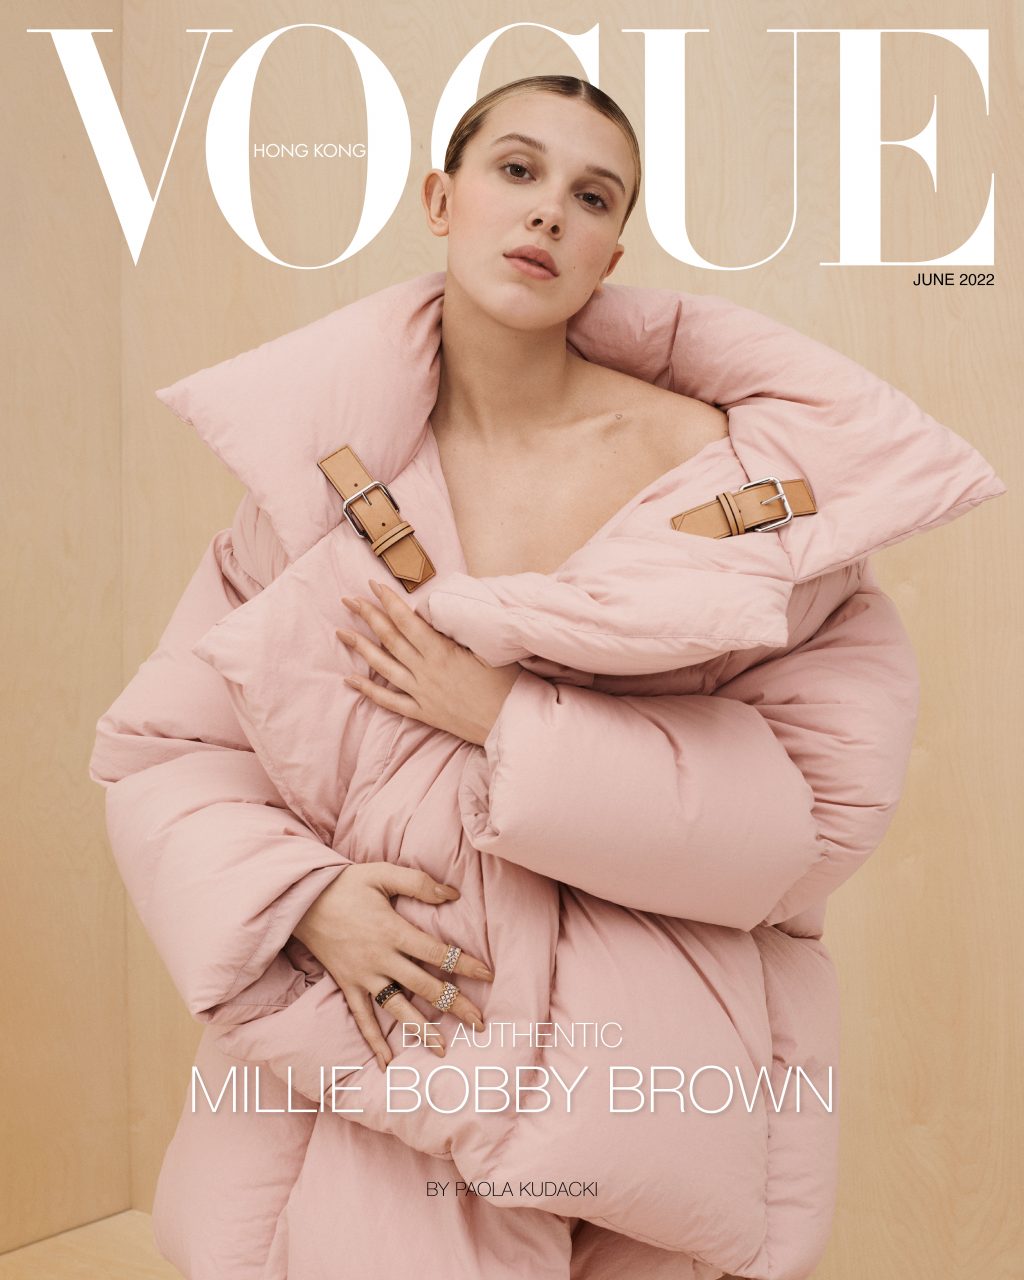 Millie Bobby Brown Stars On Vogue Hong Kong's June Issue